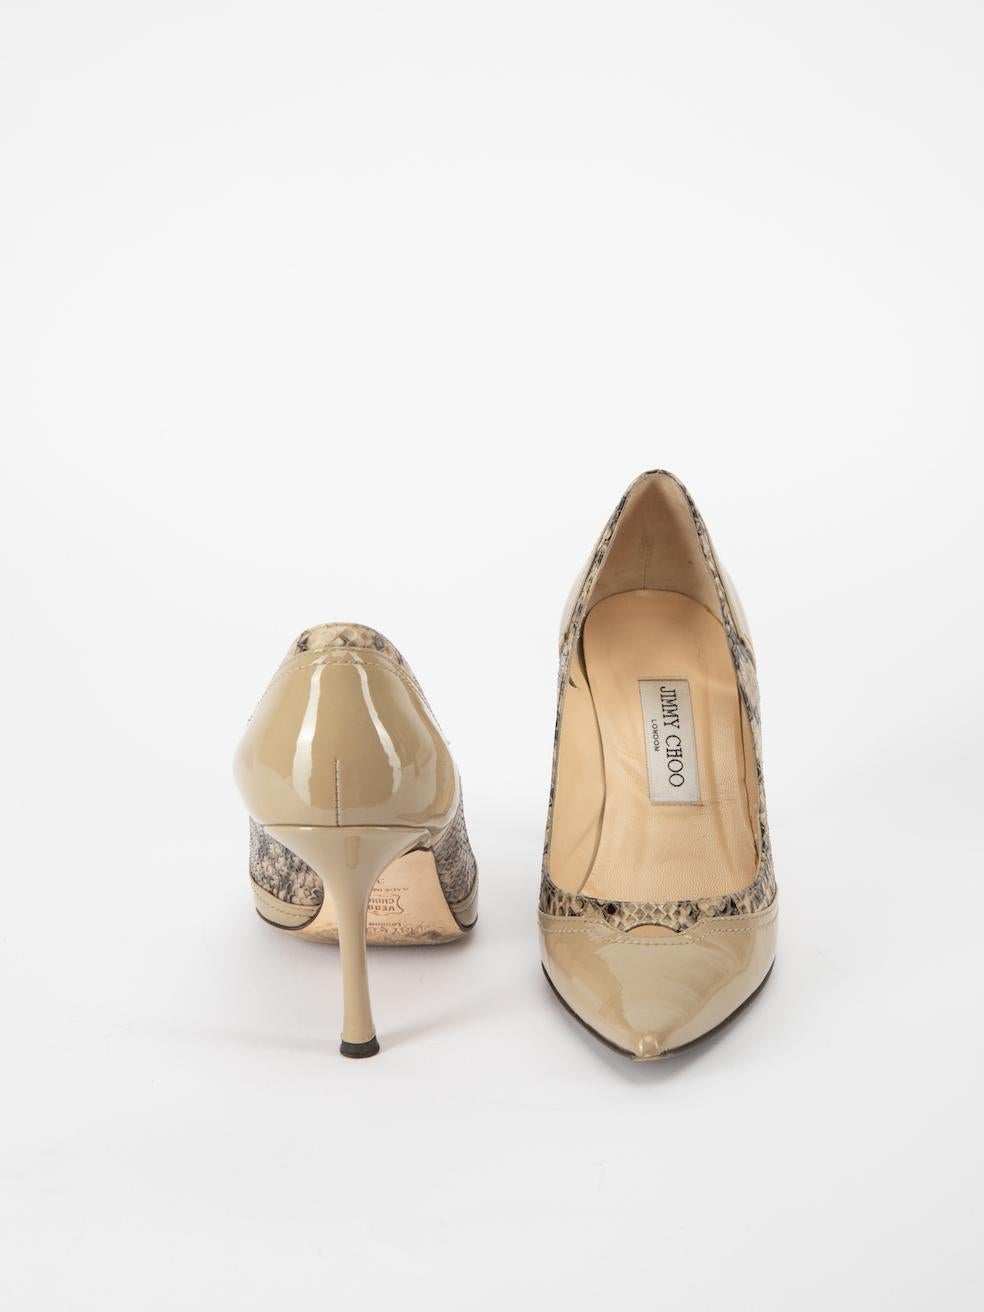 Jimmy Choo Women's Beige Patent & Snakeskin Pointed Toe Pumps In Good Condition For Sale In London, GB